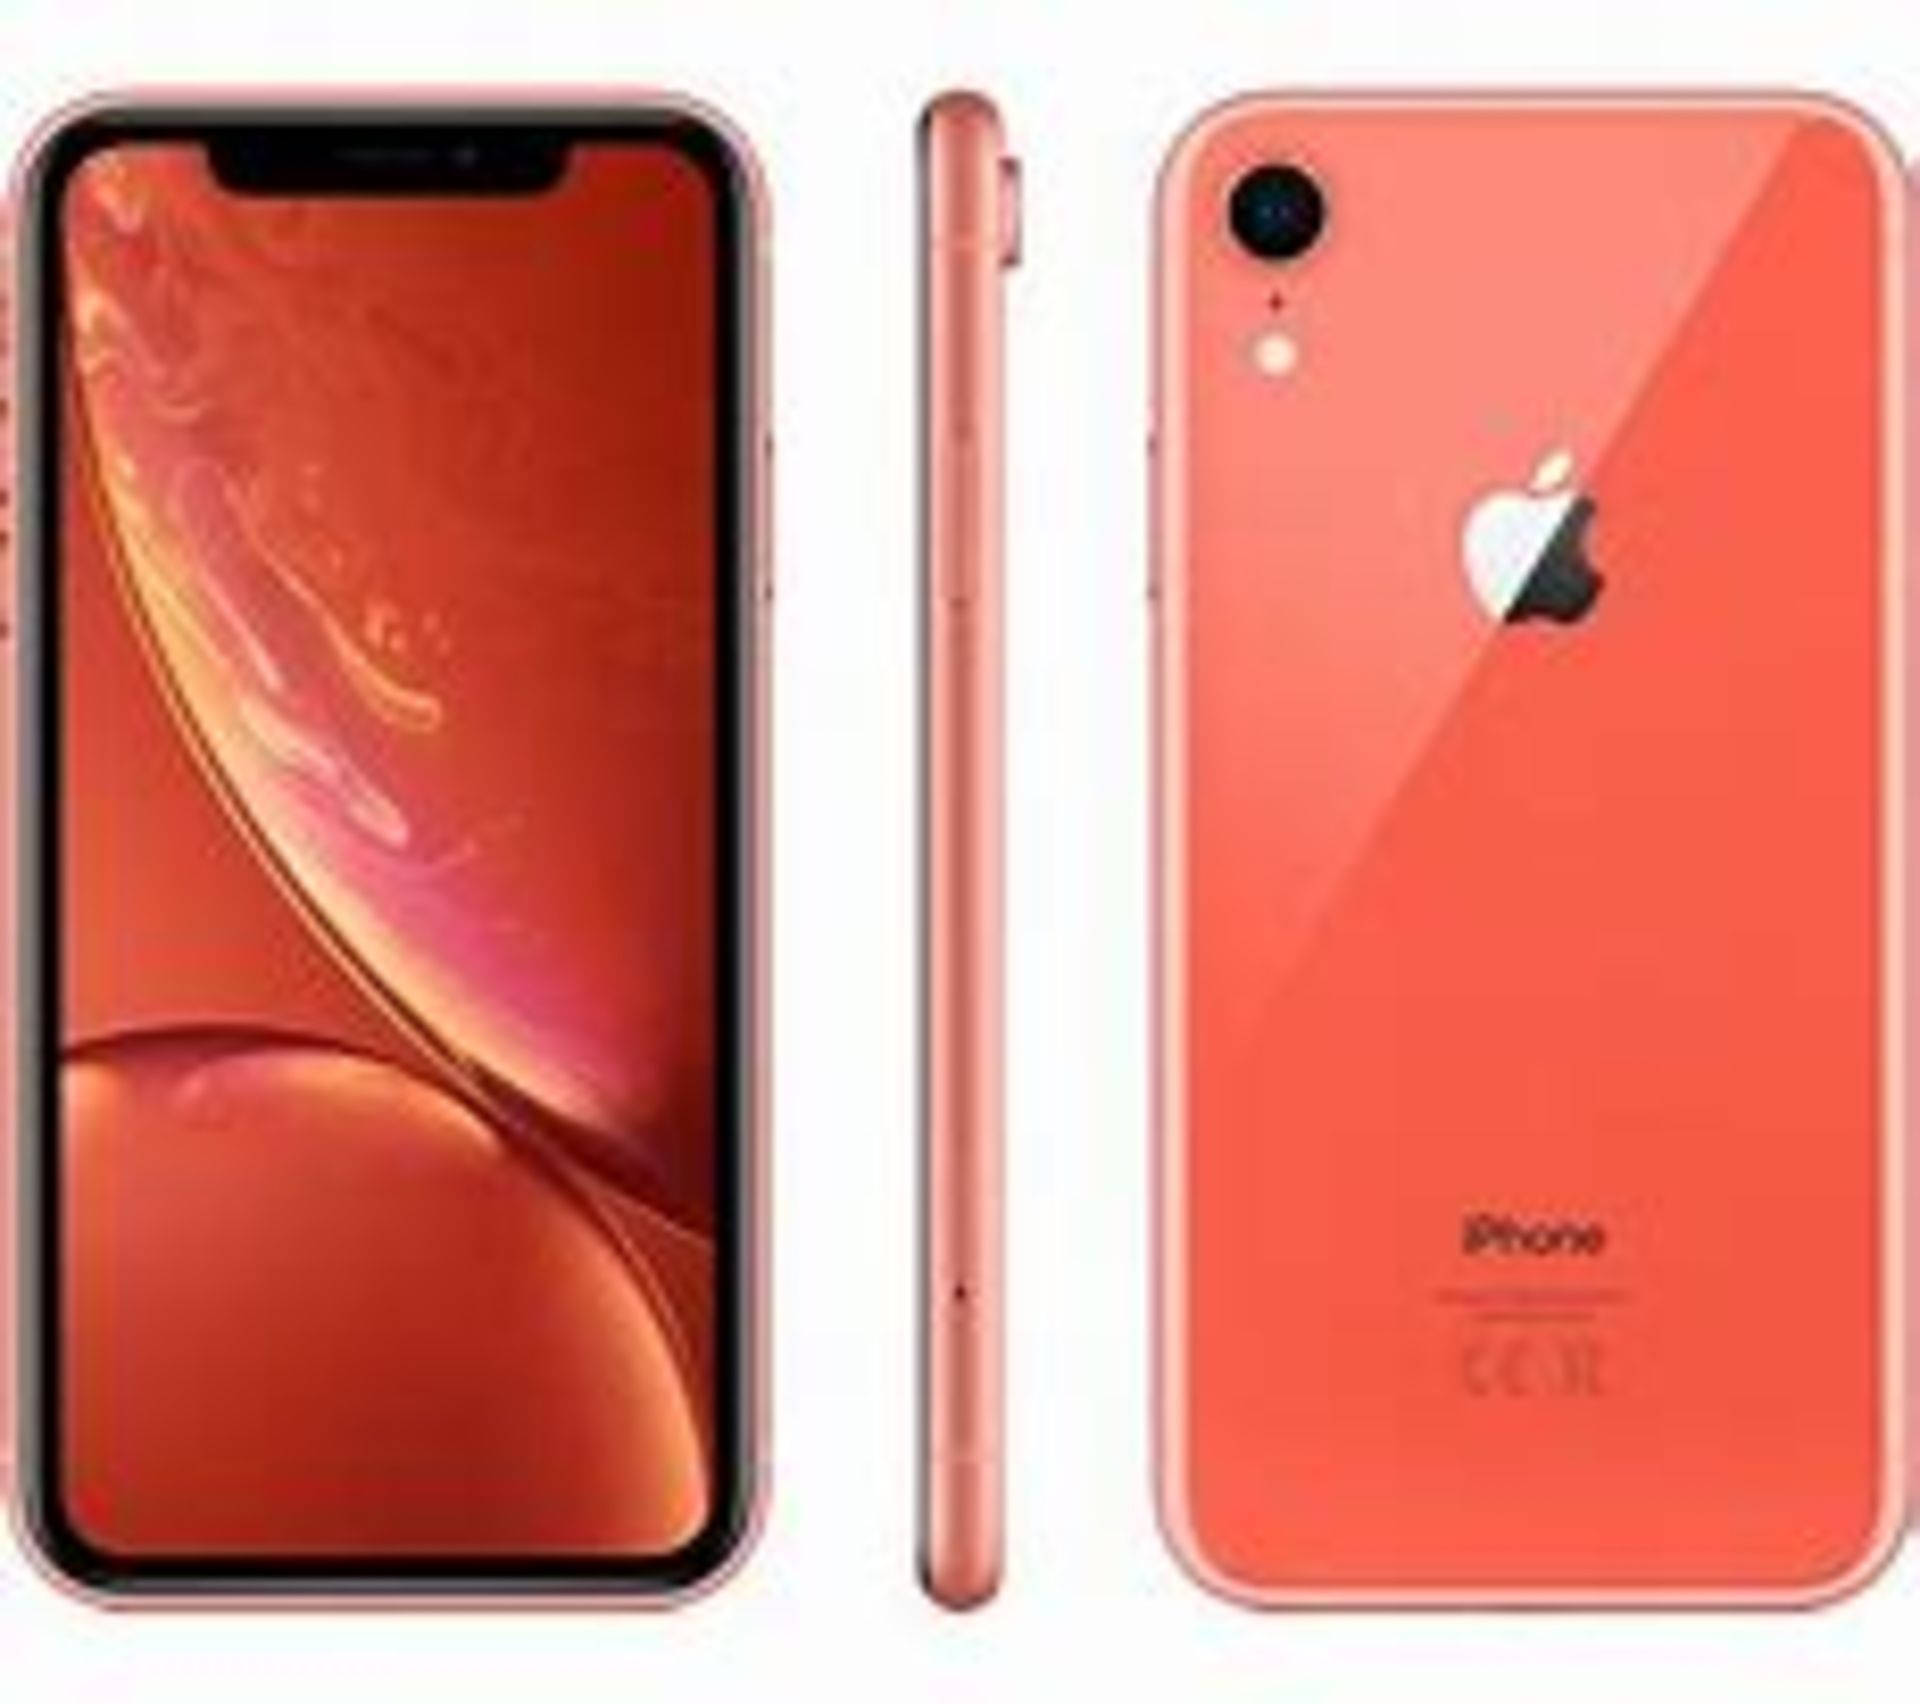 Apple iPhone XR 128GB Coral RRP £670 - Grade A - Perfect Working Condition - (Fully refurbished